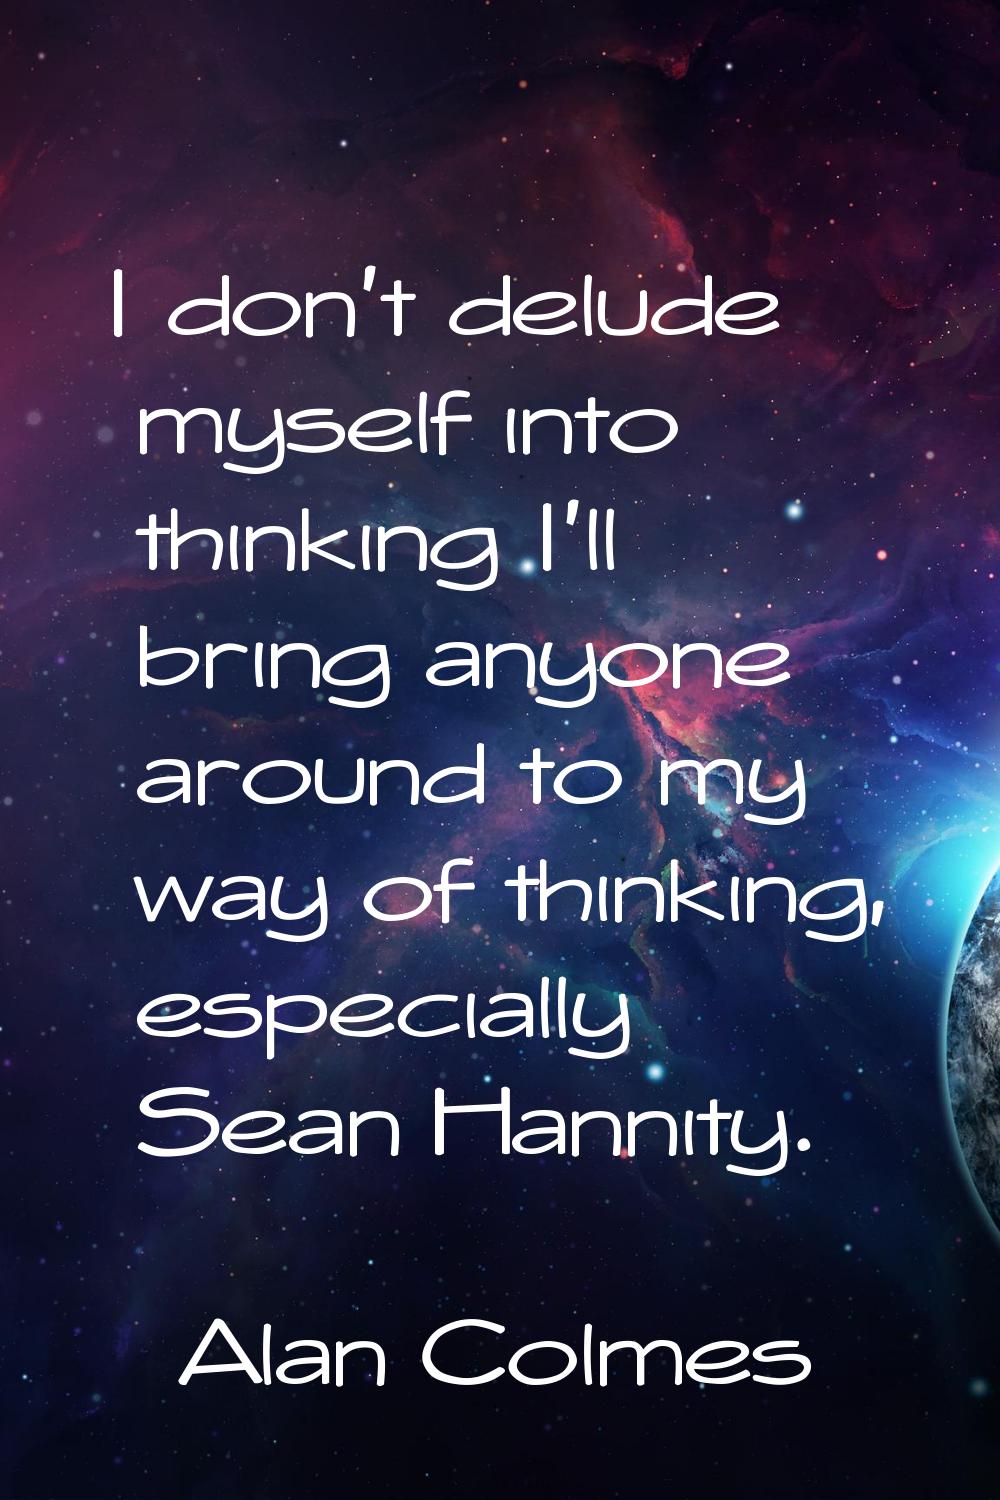 I don't delude myself into thinking I'll bring anyone around to my way of thinking, especially Sean